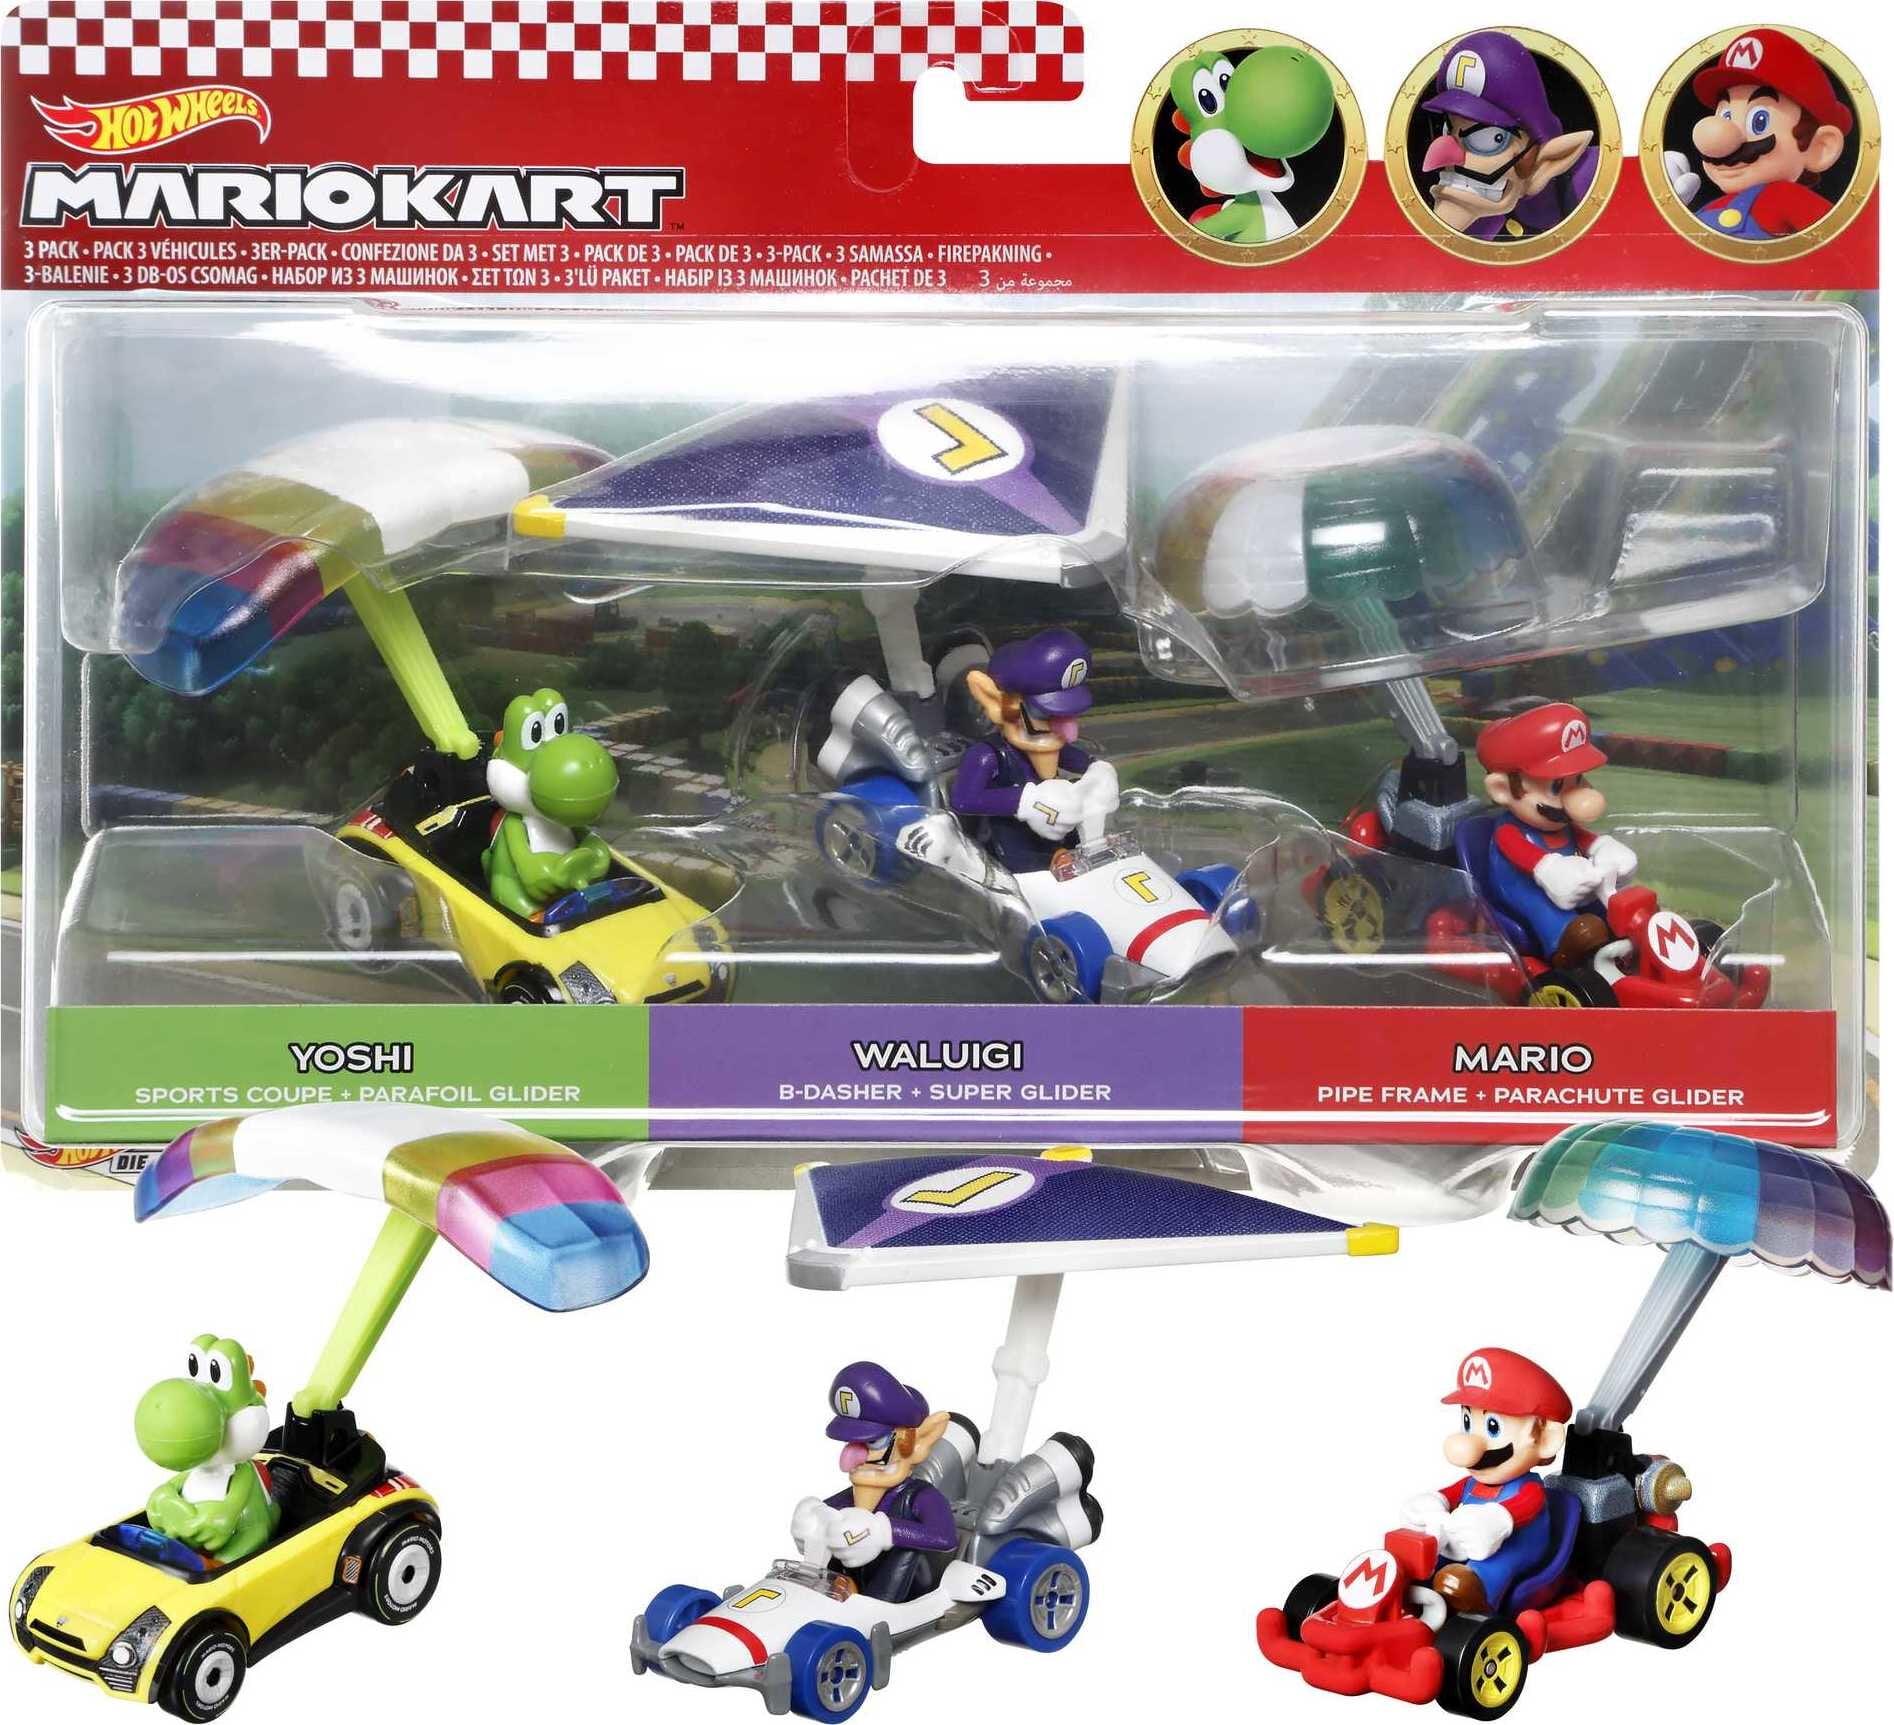 Mario Kart Die-Cast Single Racer Pack from Hot Wheels Age 3 Choice of Character 